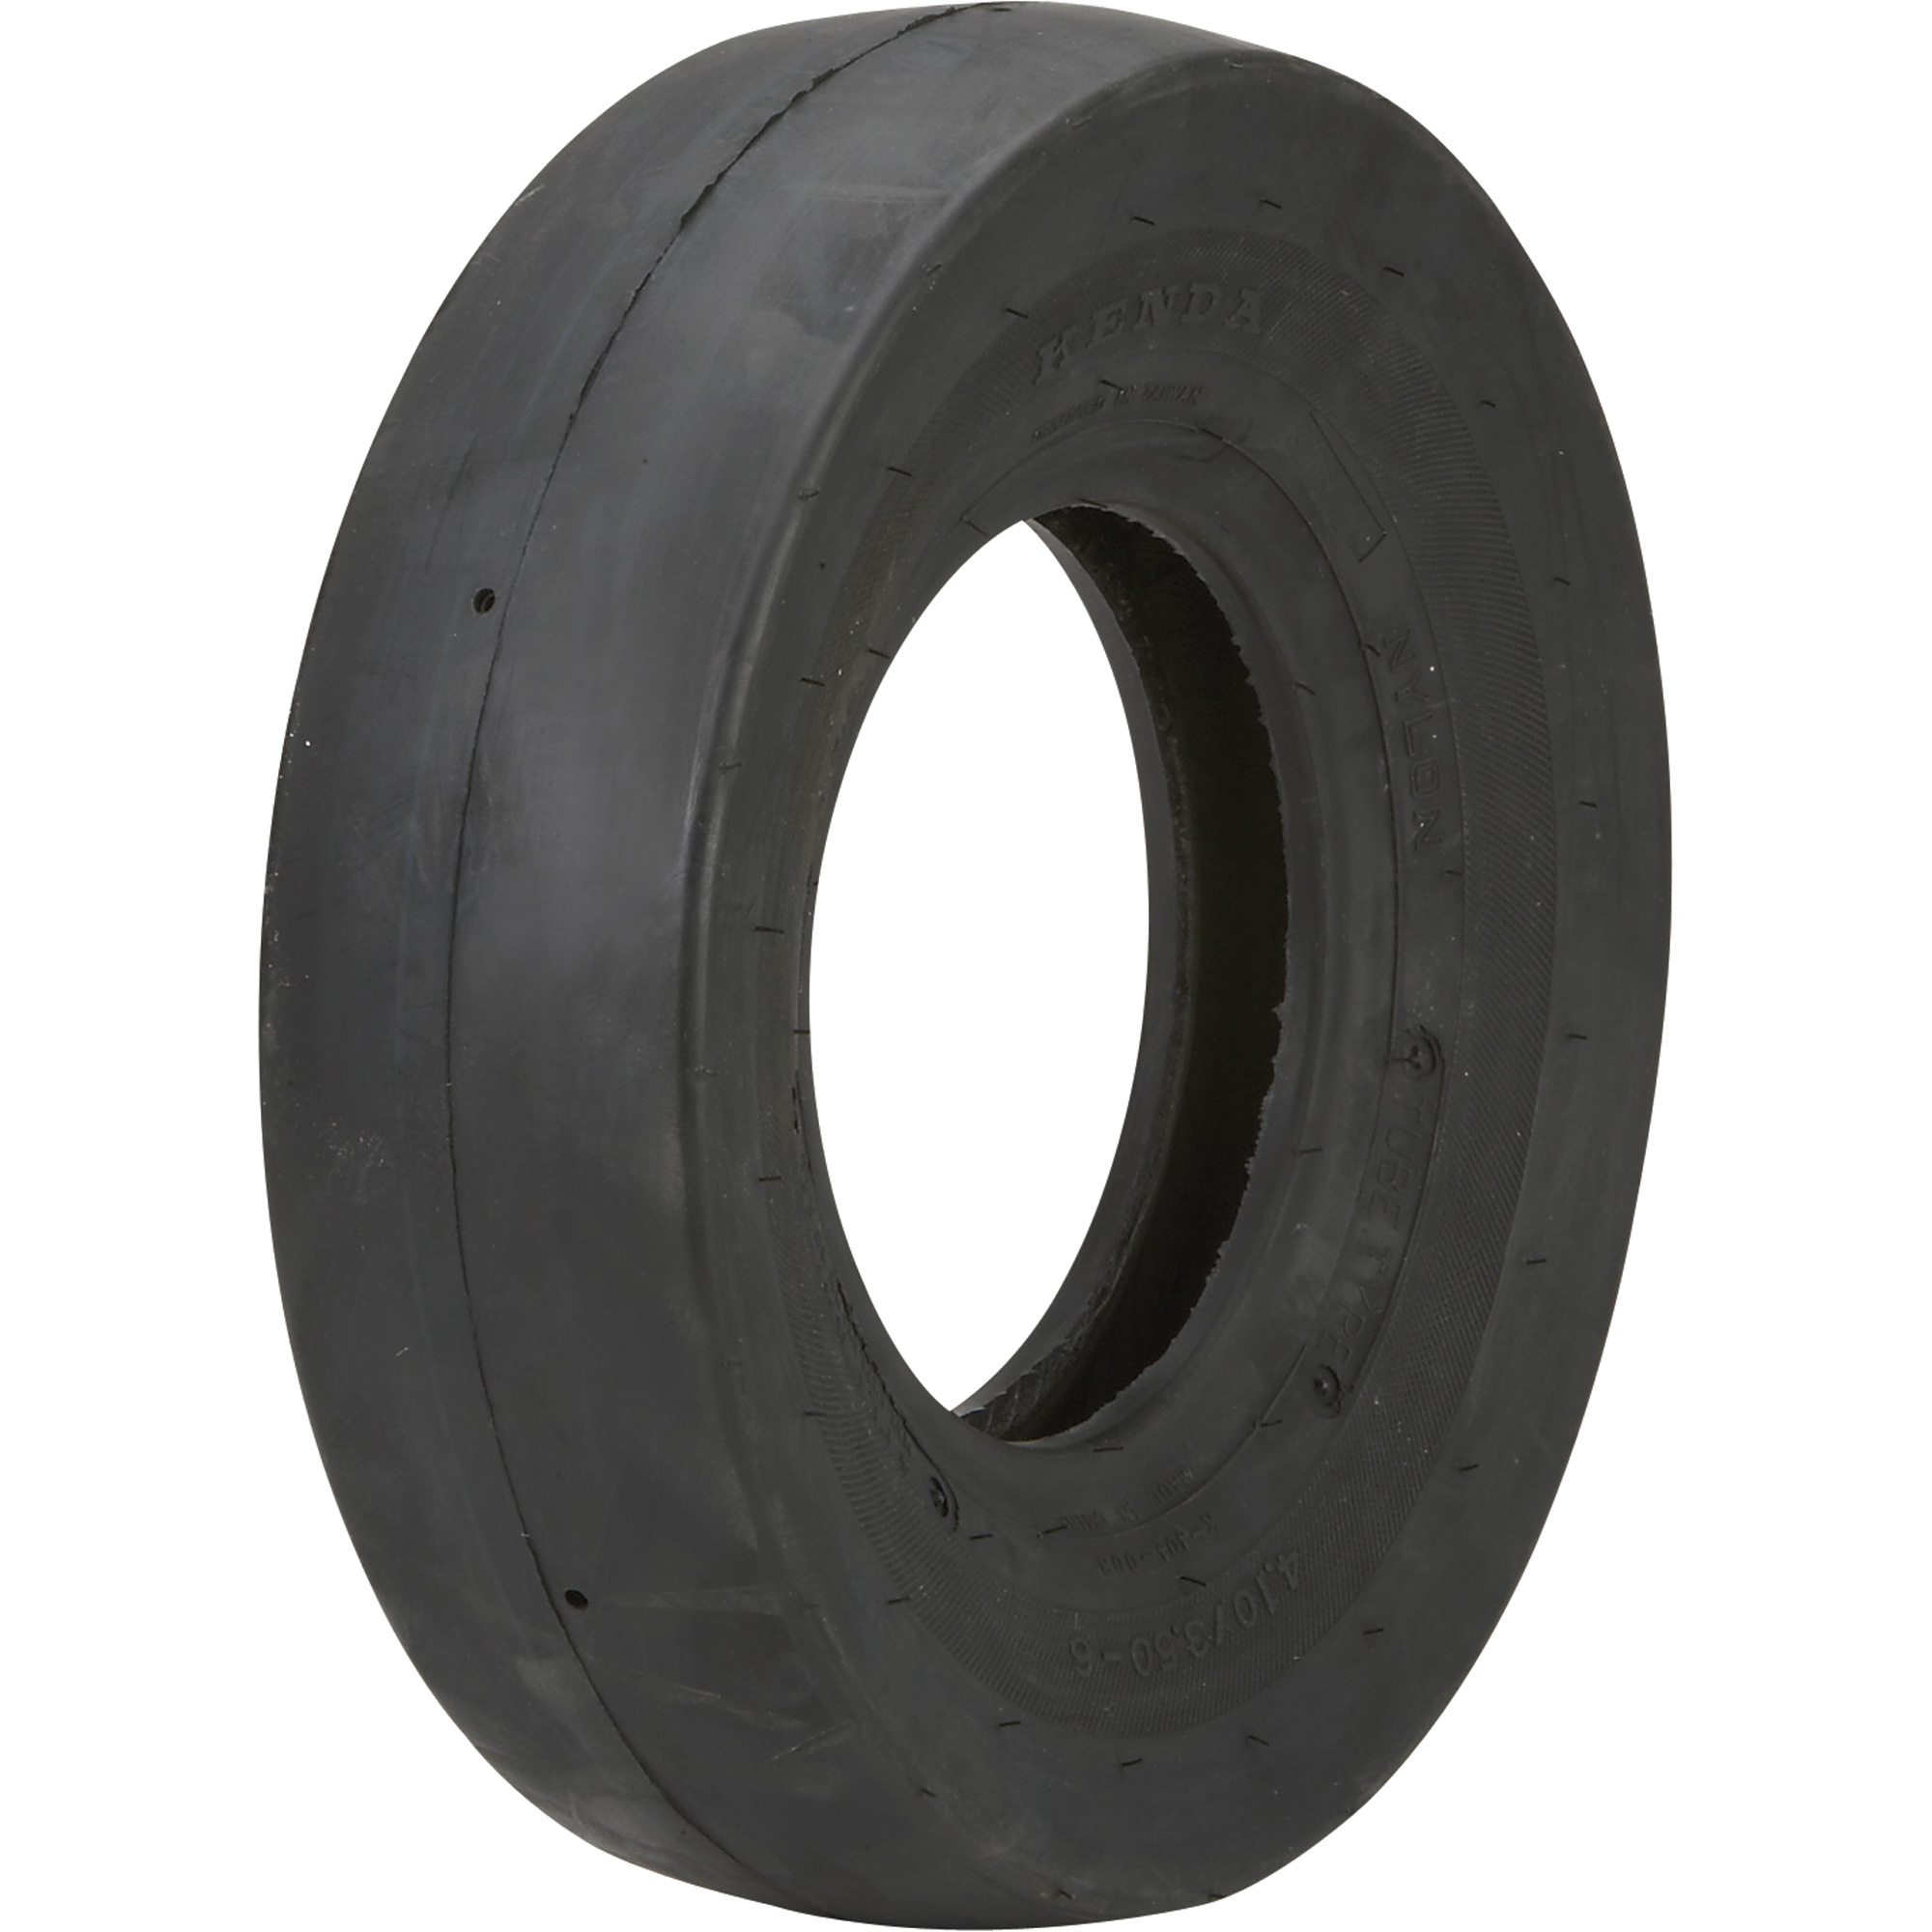 32 Tire Pictures Free Cliparts That You Can Download To You Computer